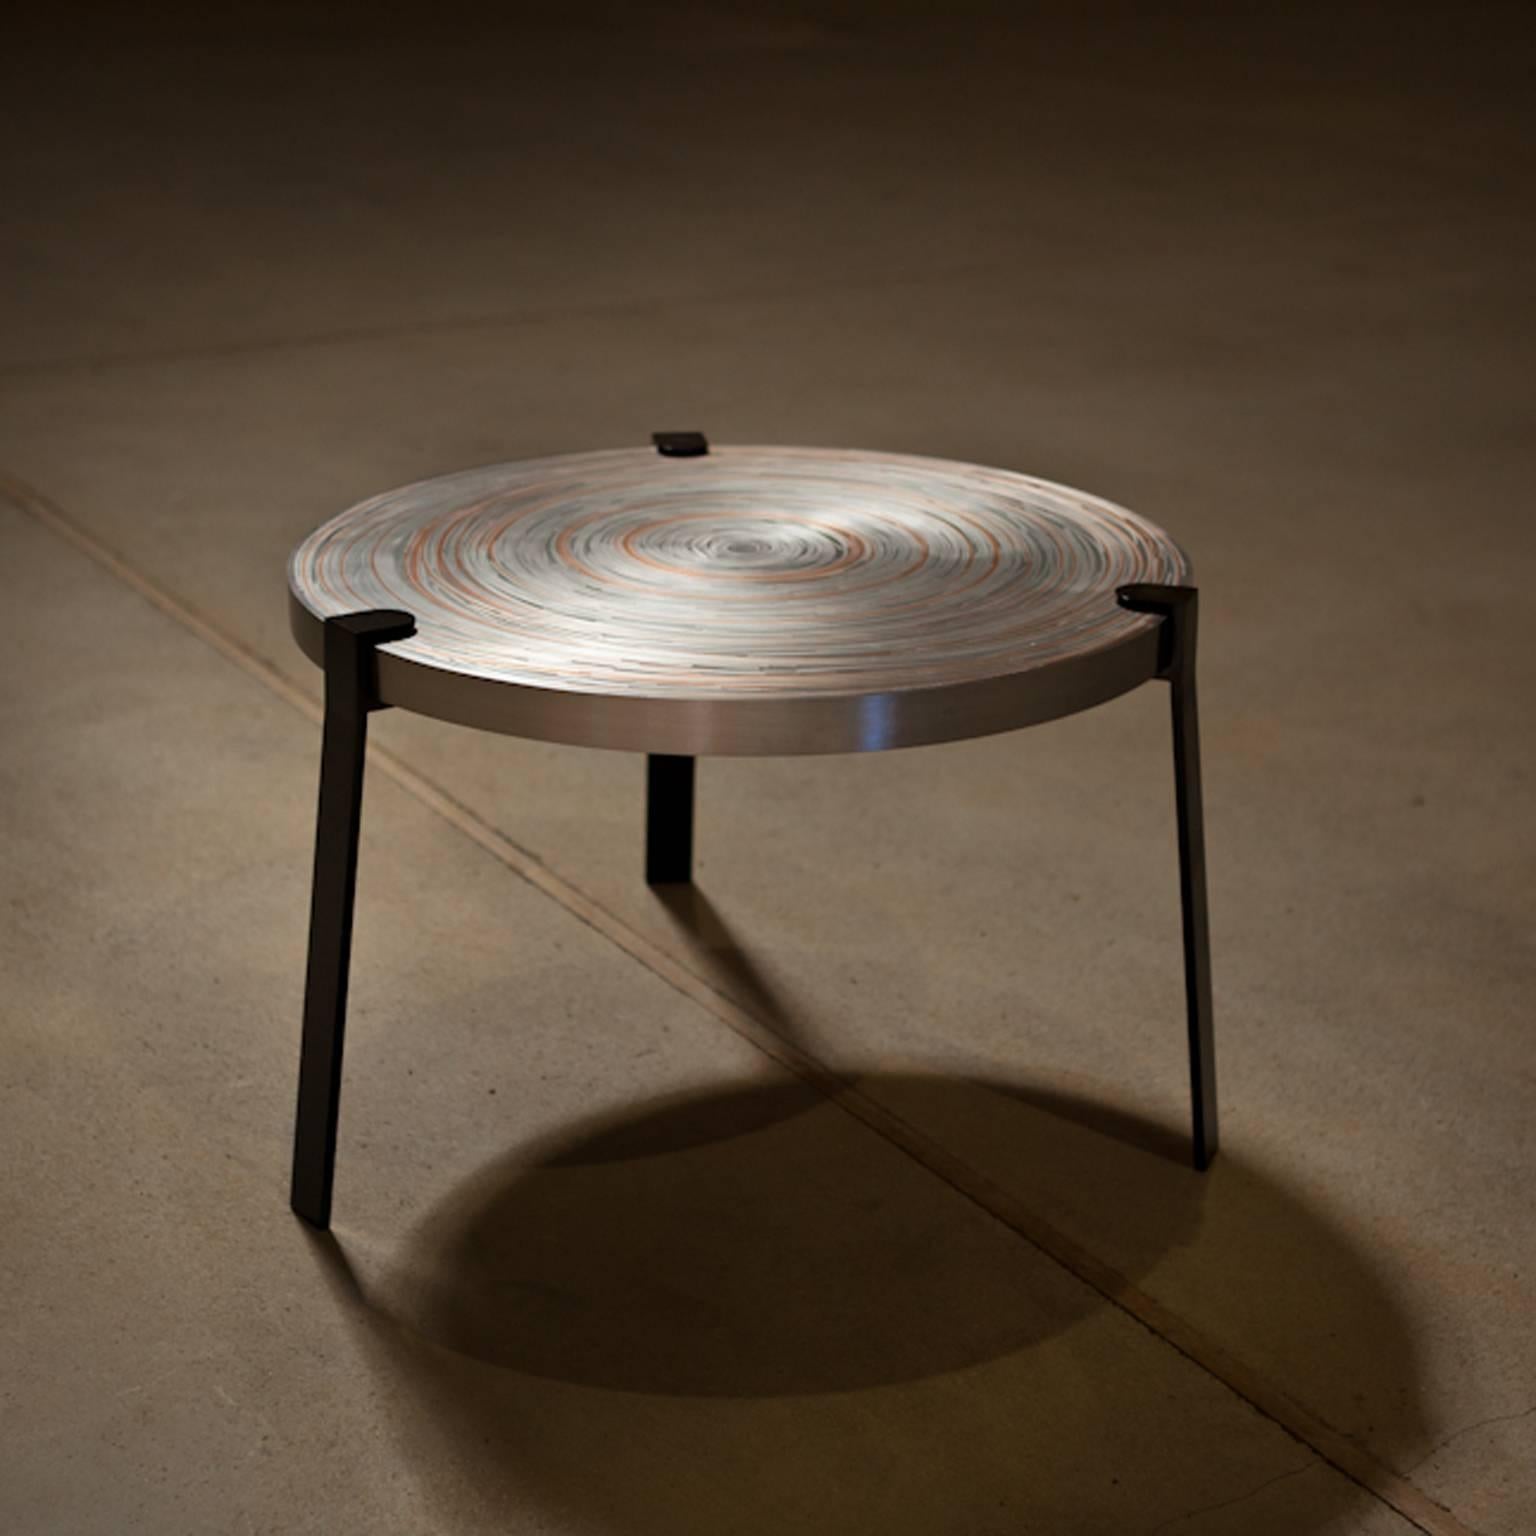 Remetaled table is a series of two tables, consisting a layering composition of different types of metal sheets.
Layering brings depth in a object, offers room for surprise and gives the metal an innovative materiality. 
By nesting metal sheets in